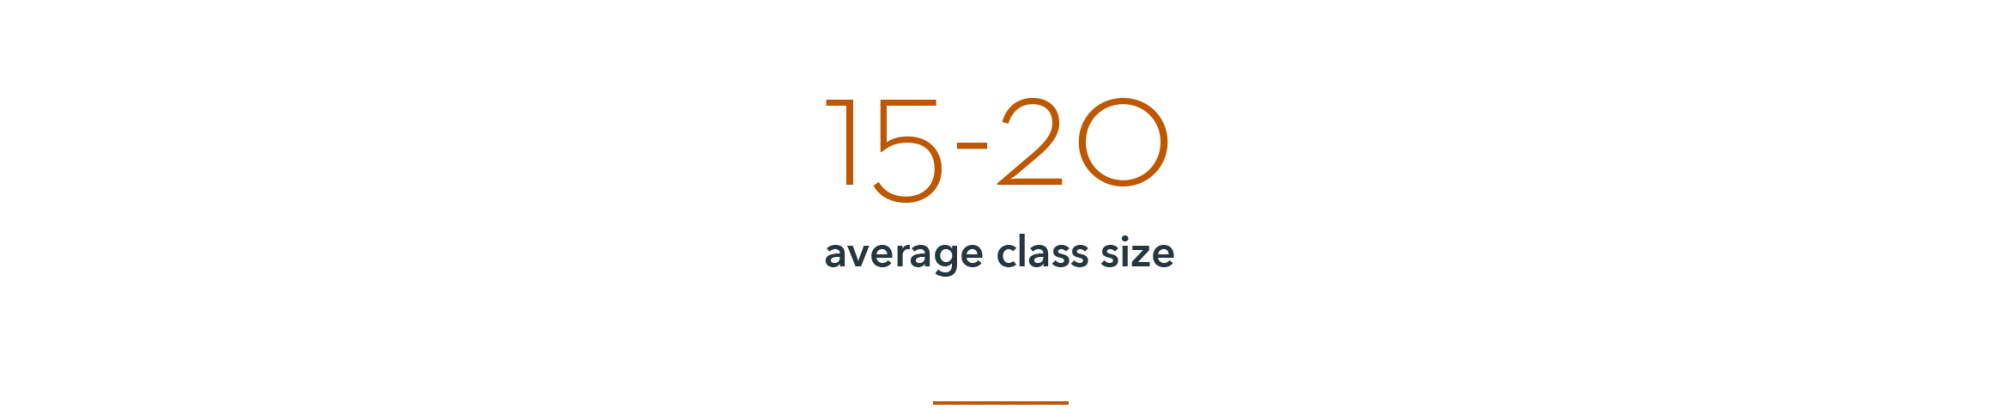 Infographic: 15-20, average class size